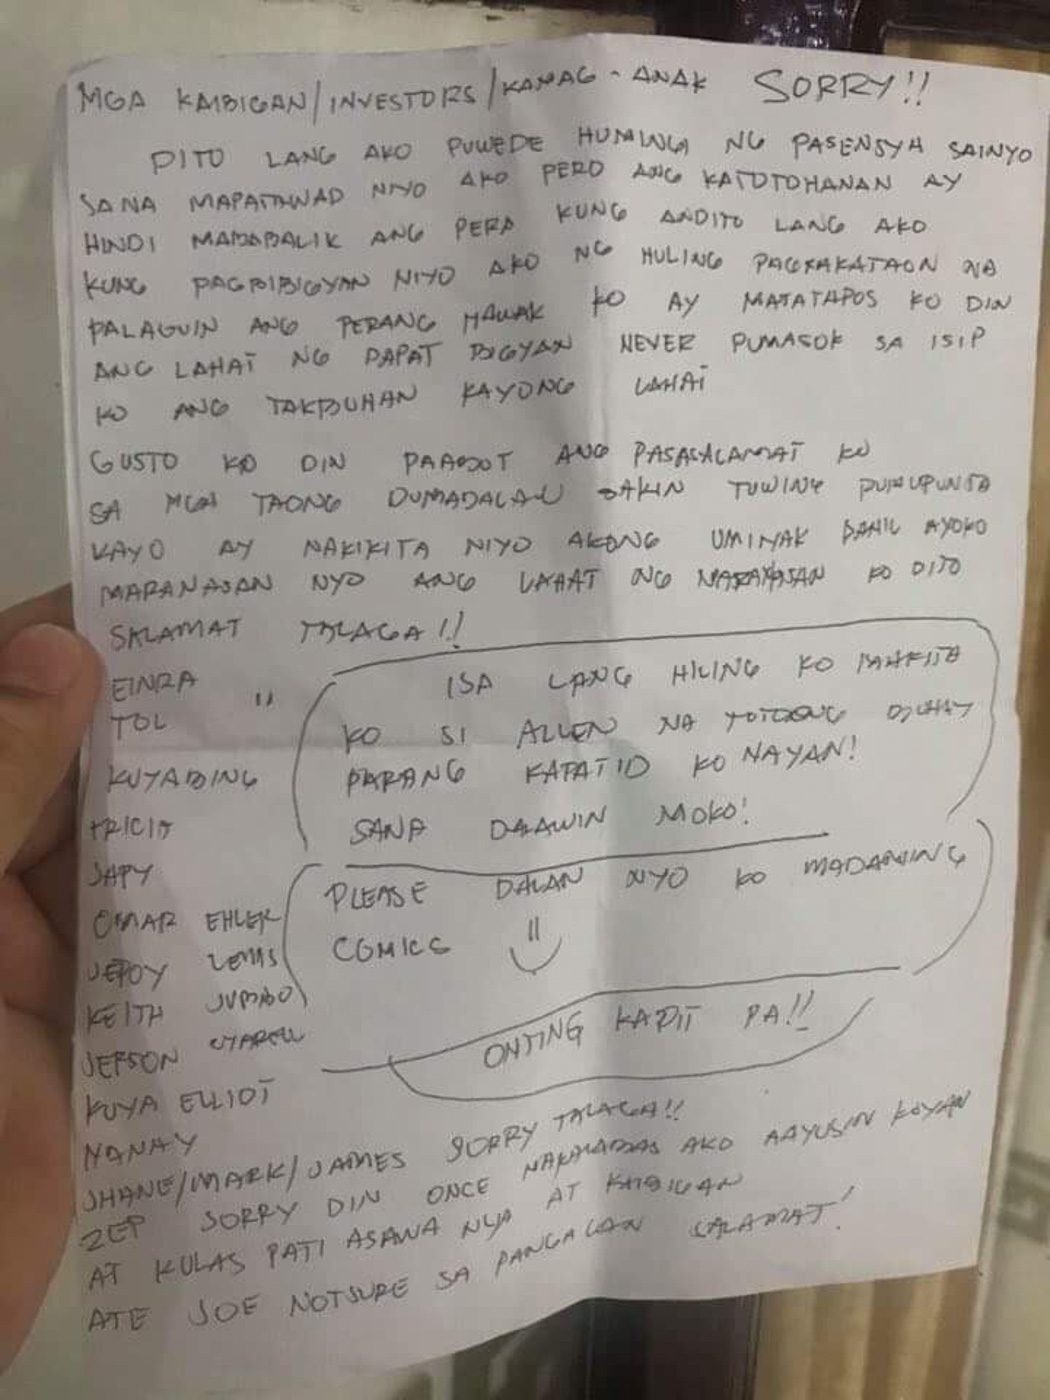 PERSONAL LETTER. Alleged scam mastermind Arnel Ordonio writes a letter to his investors. Sourced photo 